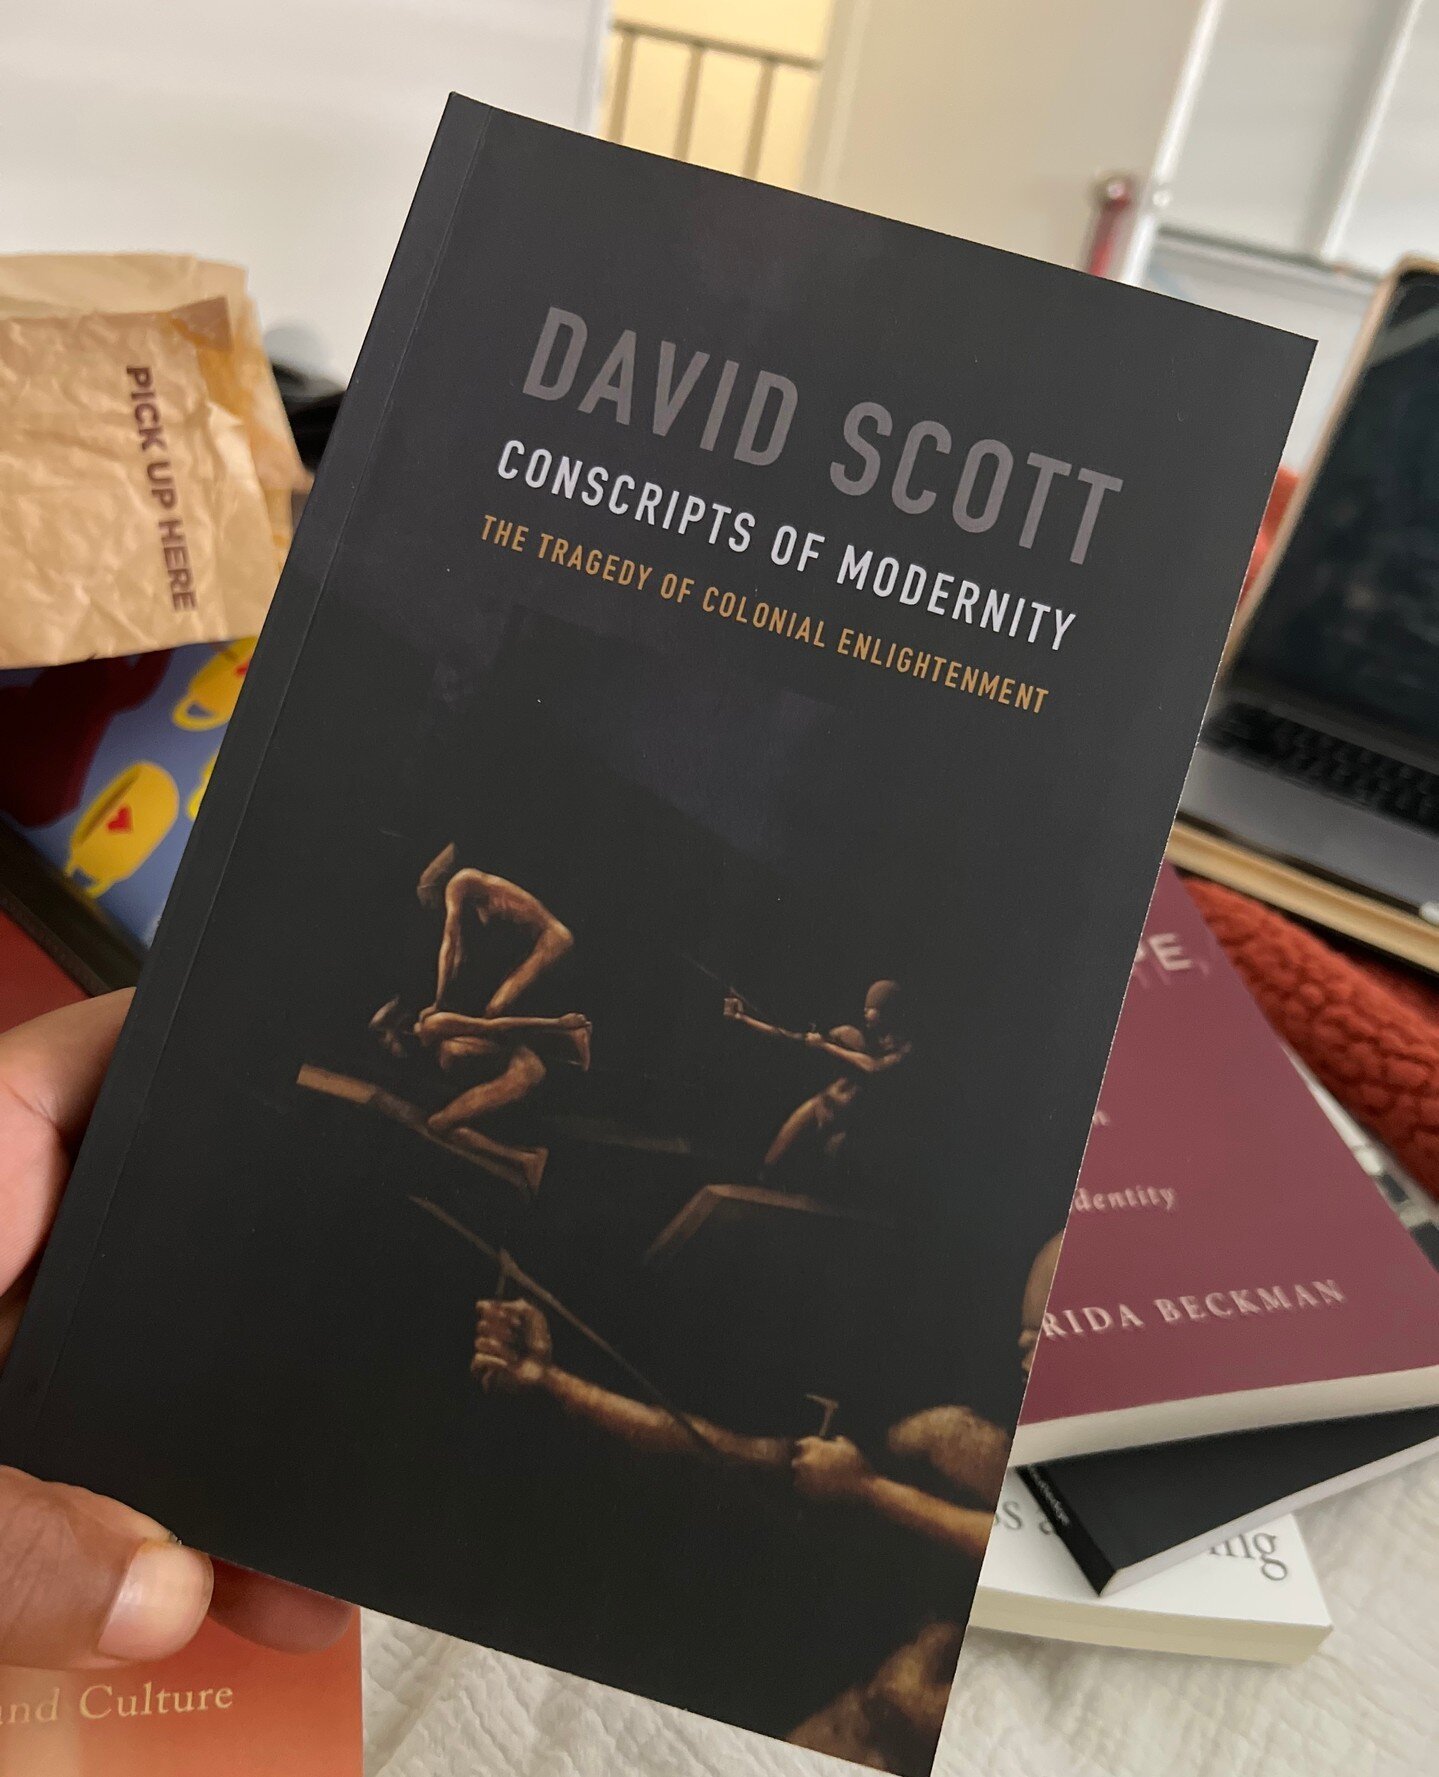 Conscripts of Modernity challenges conventional narratives and invites us to reexamine the impact of colonialism and modernity on contemporary societies. Scott explores how power structures shape our understanding of history, identity, and resistance